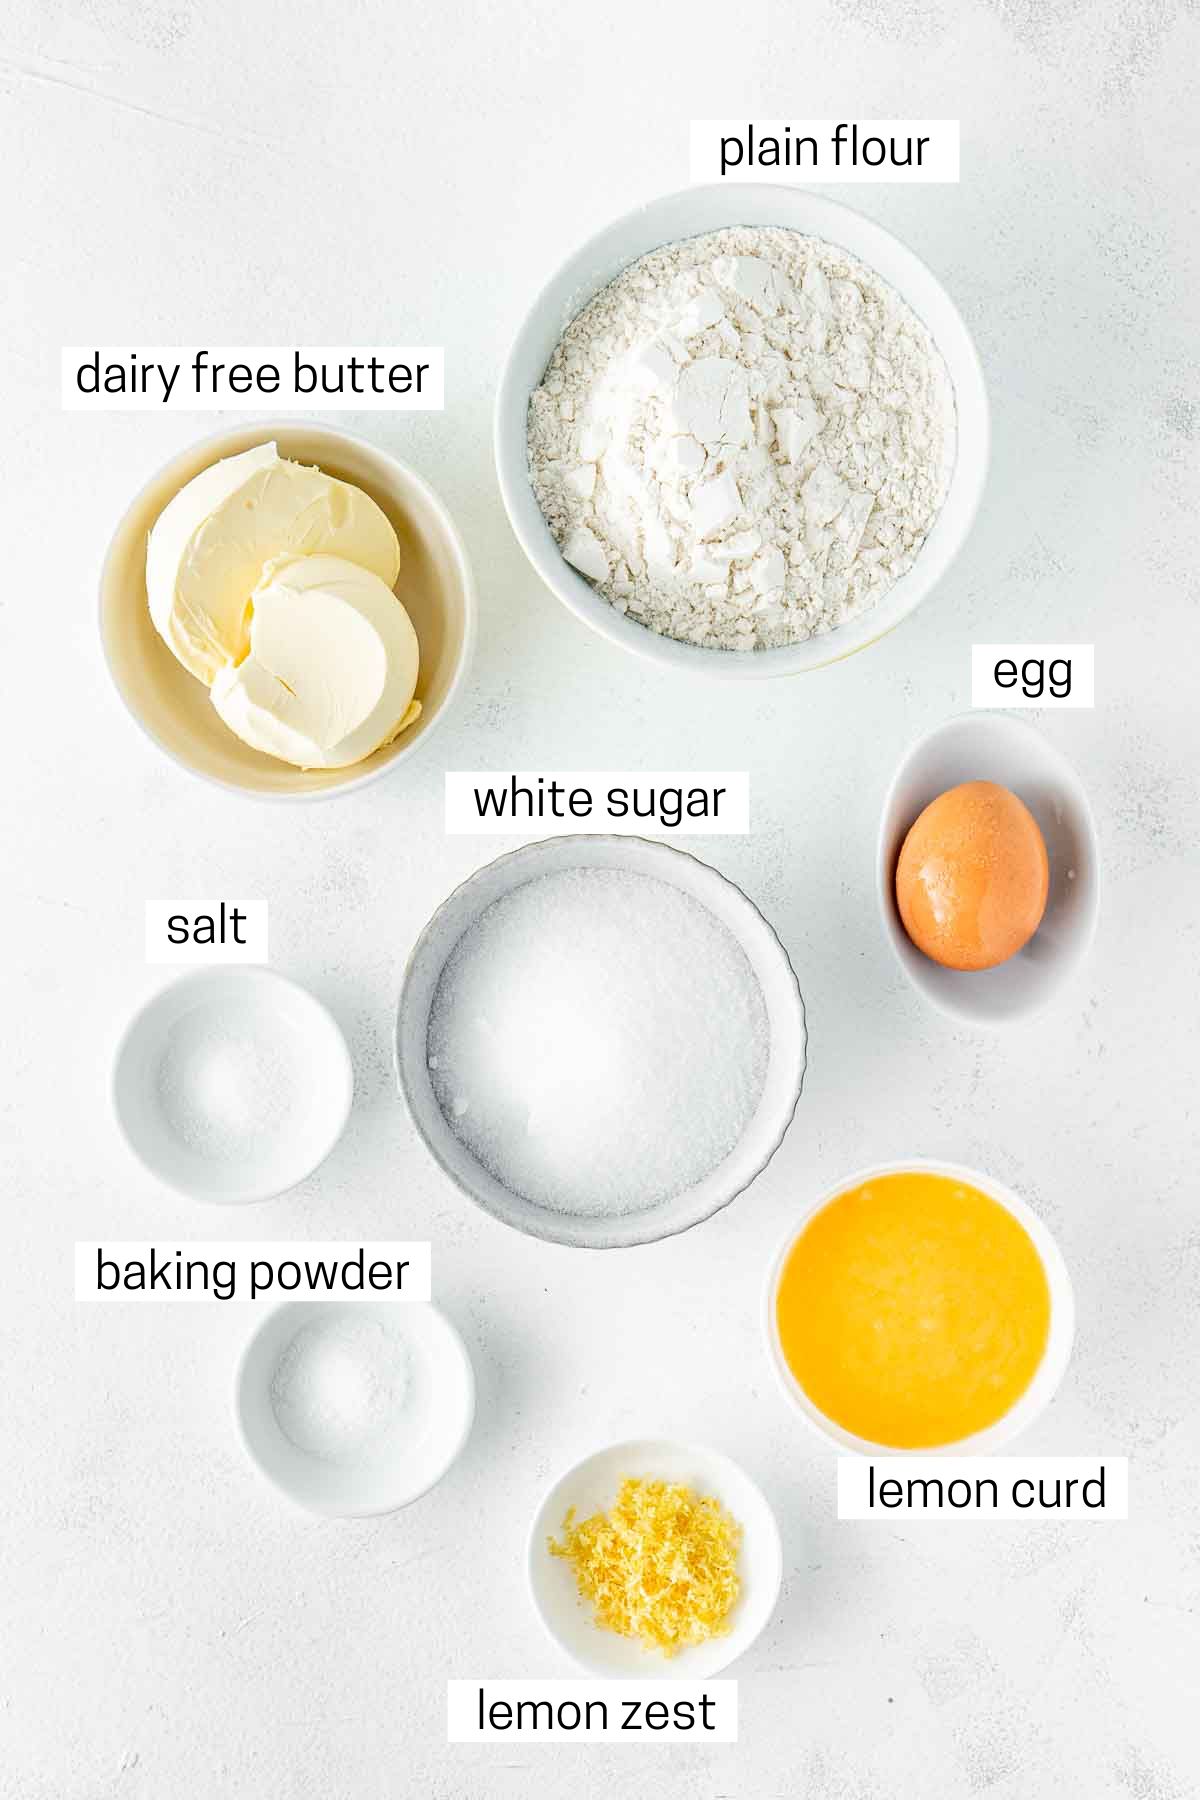 All ingredients needed to make lemon thumbprint cookies laid out in small bowls.